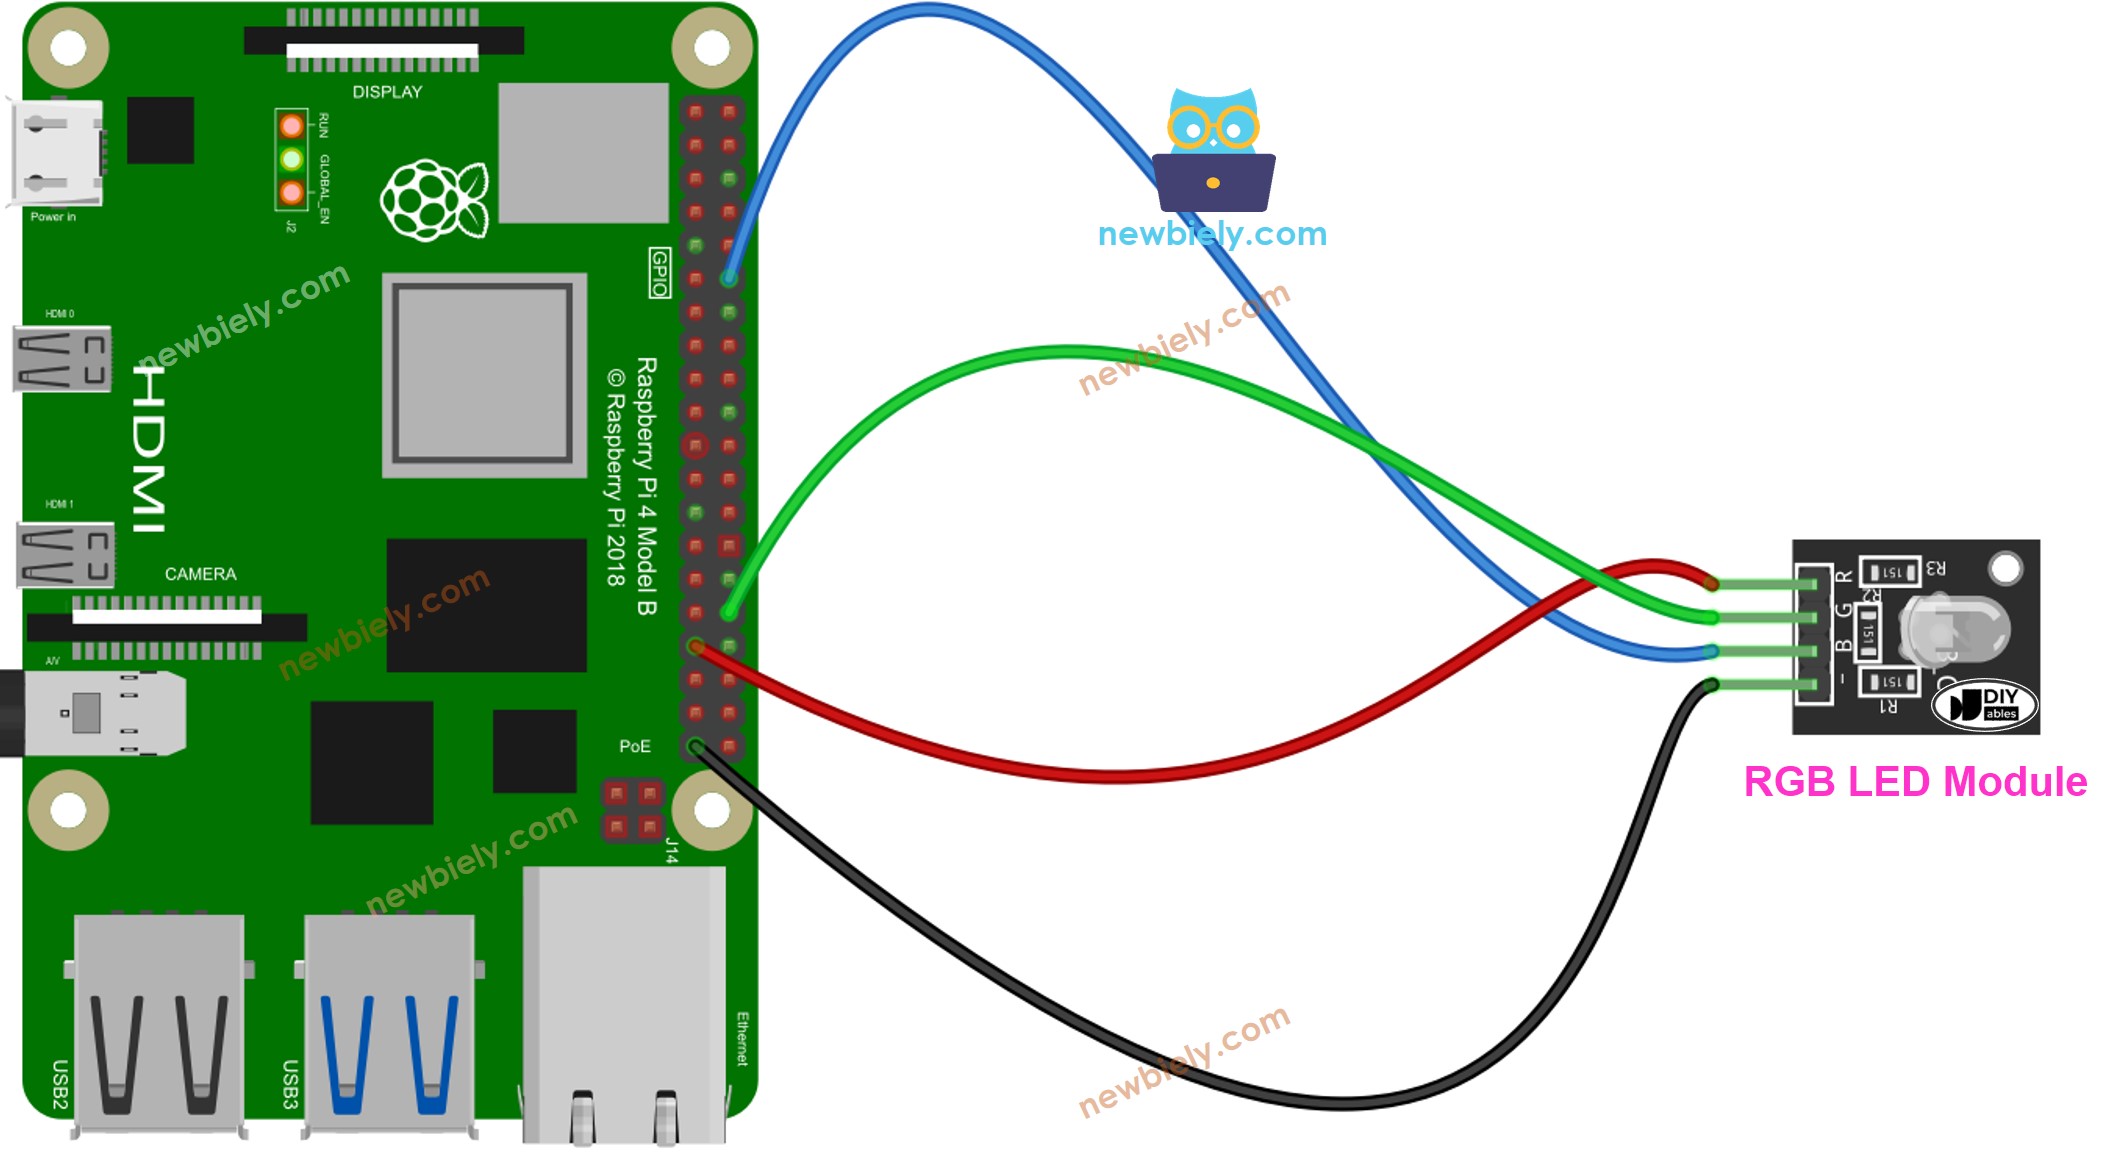 The wiring diagram between Raspberry Pi and RGB LED module